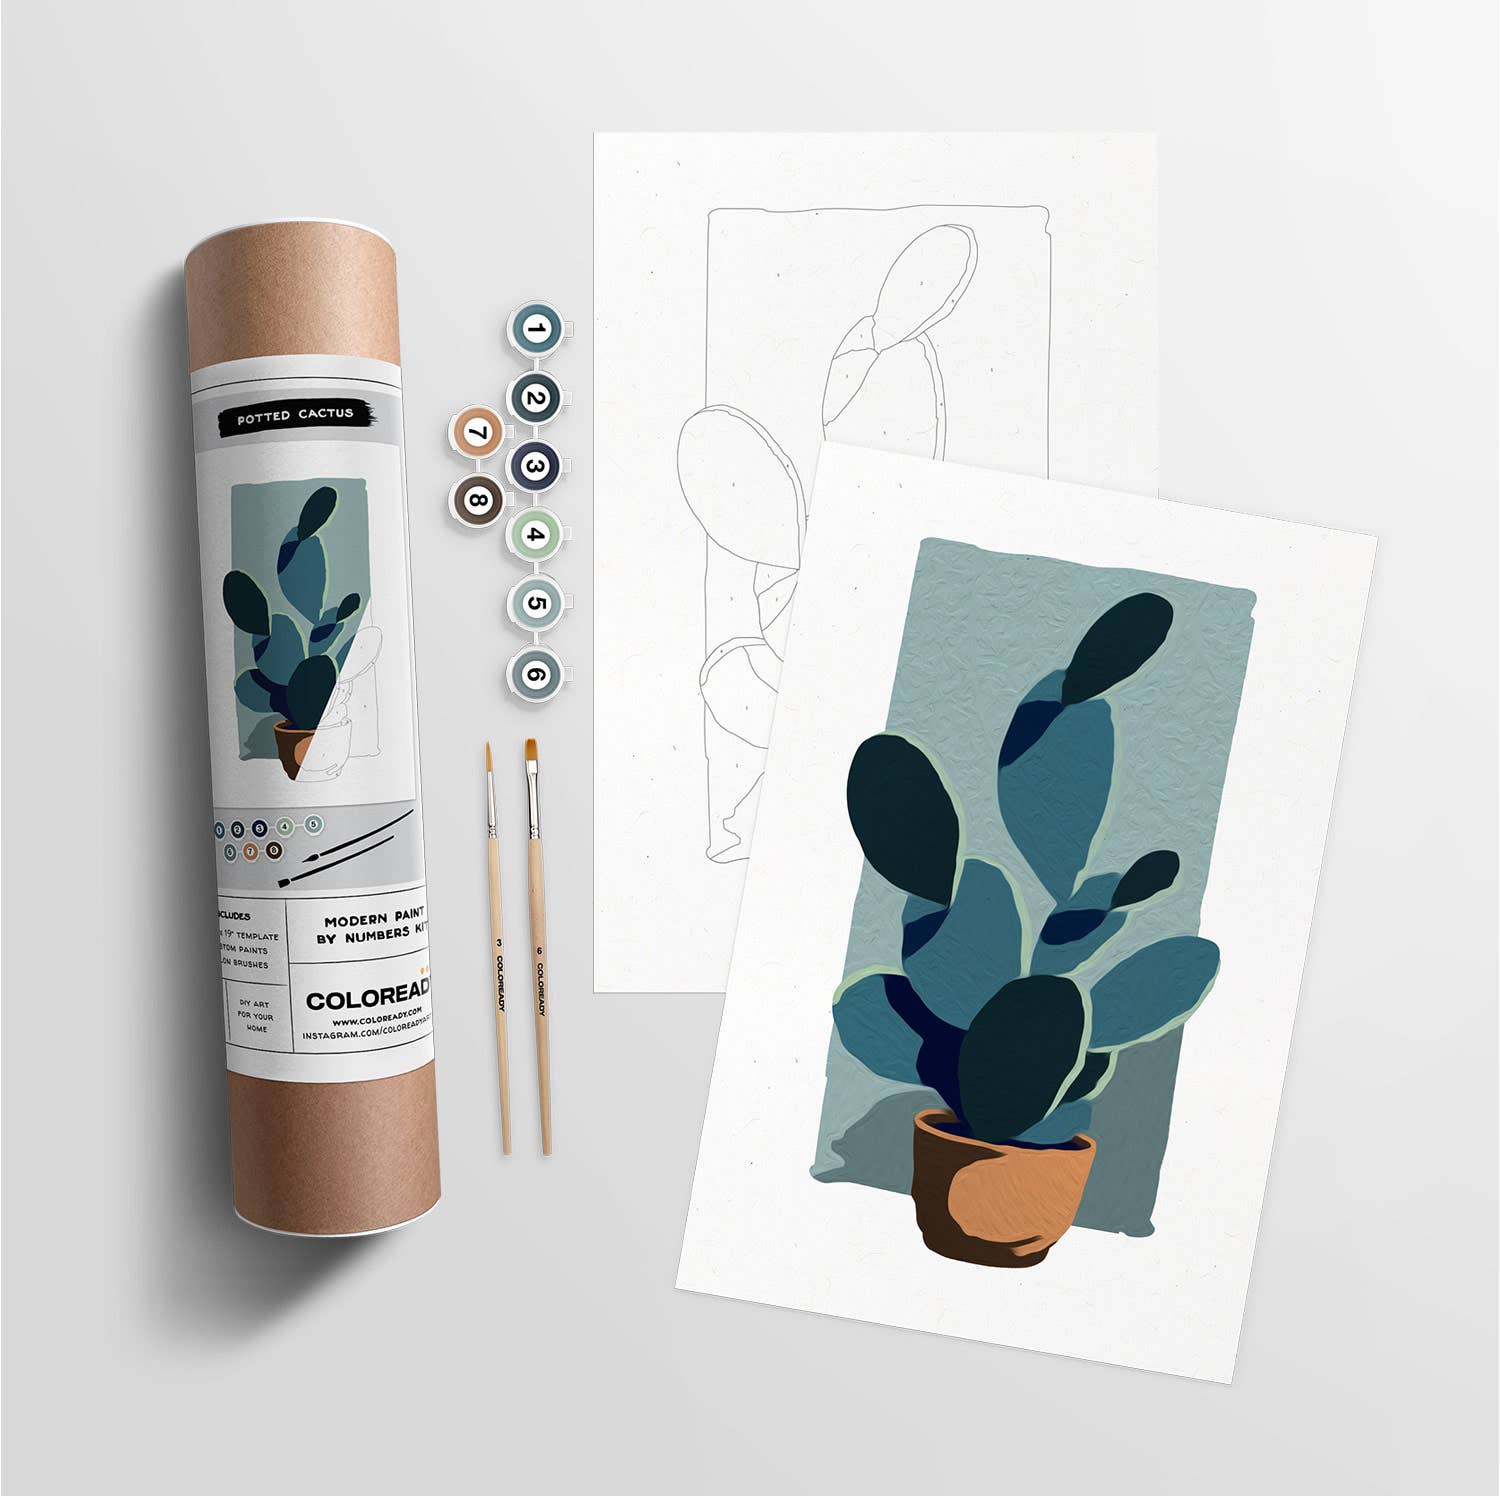 Modern Paint by Numbers Kit: Potted Cactus